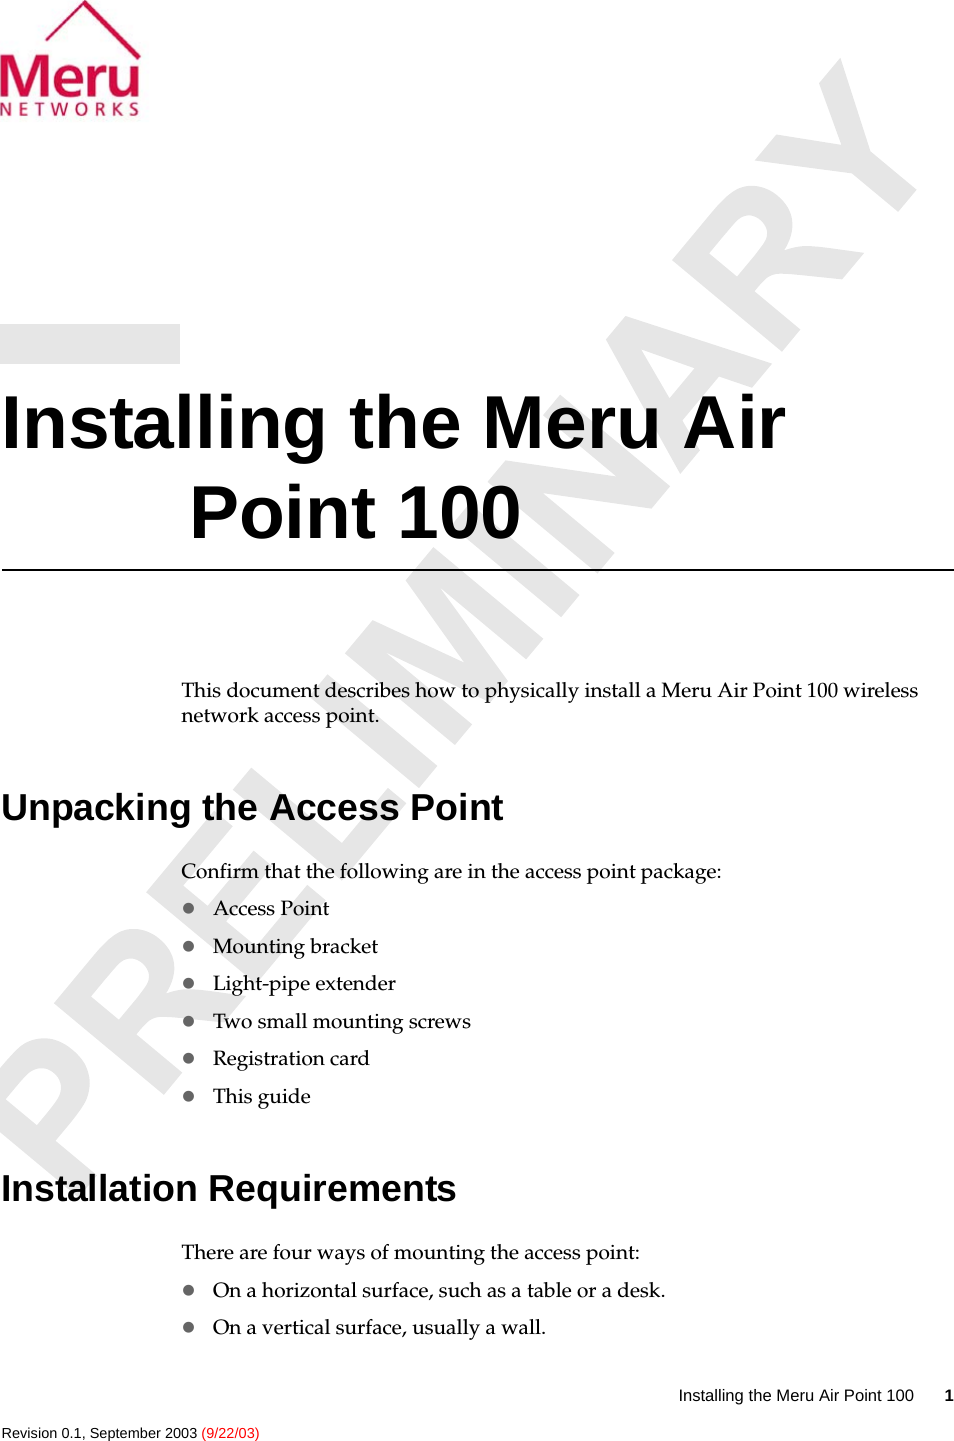 Installing the Meru Air Point 100 1 Revision 0.1, September 2003 (9/22/03)Installing the Meru Air Point 100This document describes how to physically install a Meru Air Point 100 wireless network access point. Unpacking the Access PointConfirm that the following are in the access point package:zAccess PointzMounting bracketzLight-pipe extenderzTwo small mounting screwszRegistration cardzThis guideInstallation RequirementsThere are four ways of mounting the access point:zOn a horizontal surface, such as a table or a desk.zOn a vertical surface, usually a wall.